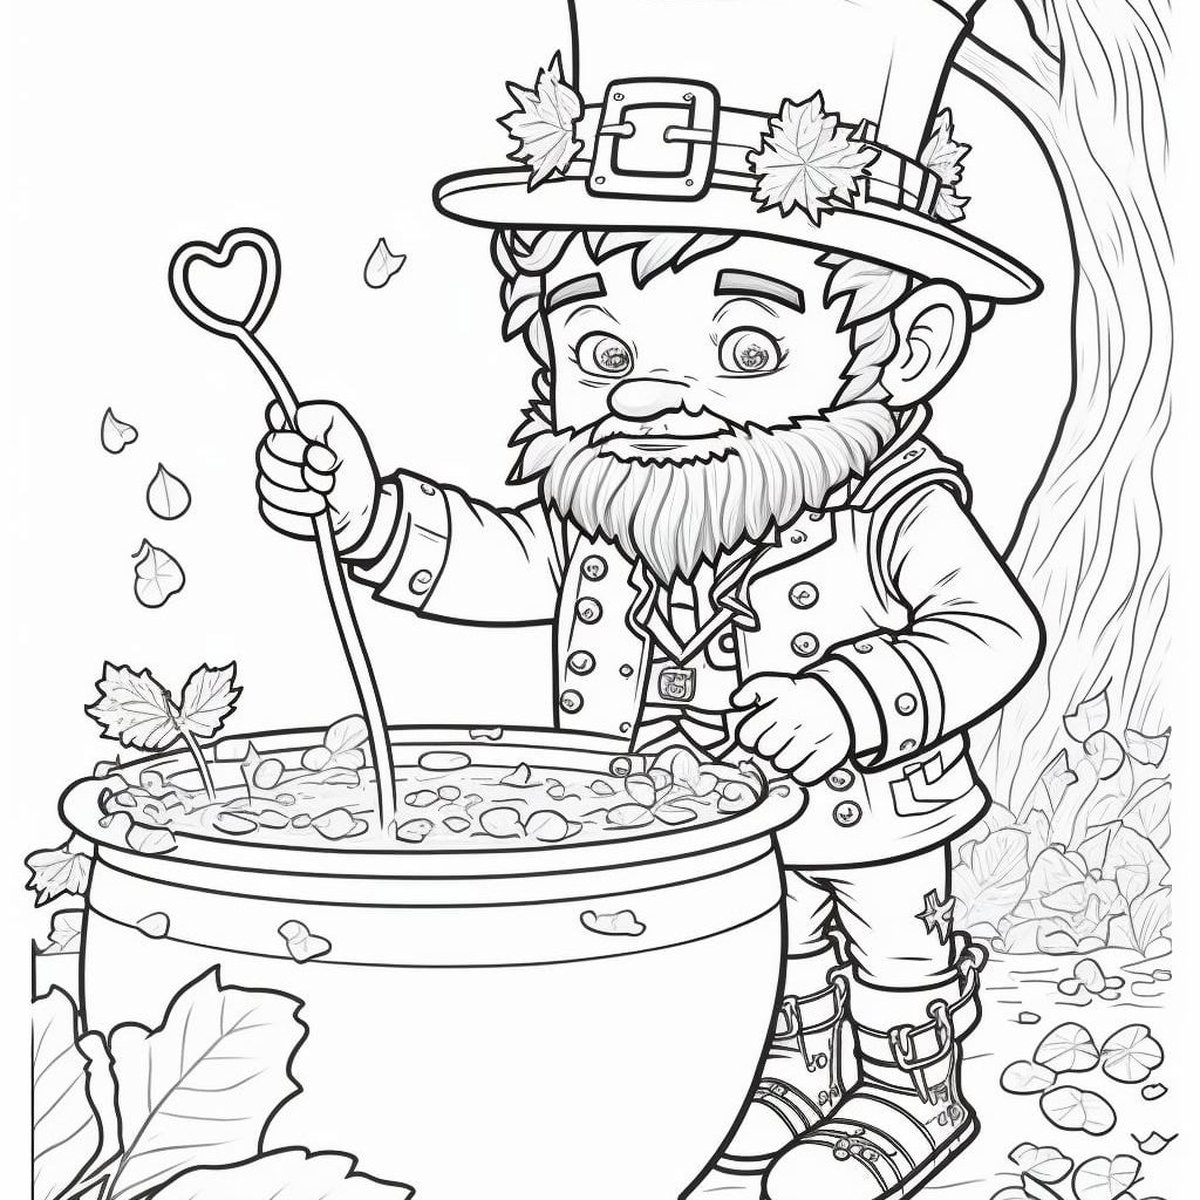 Patricks day coloring leprechaun discovering a pot of gold coloring page template